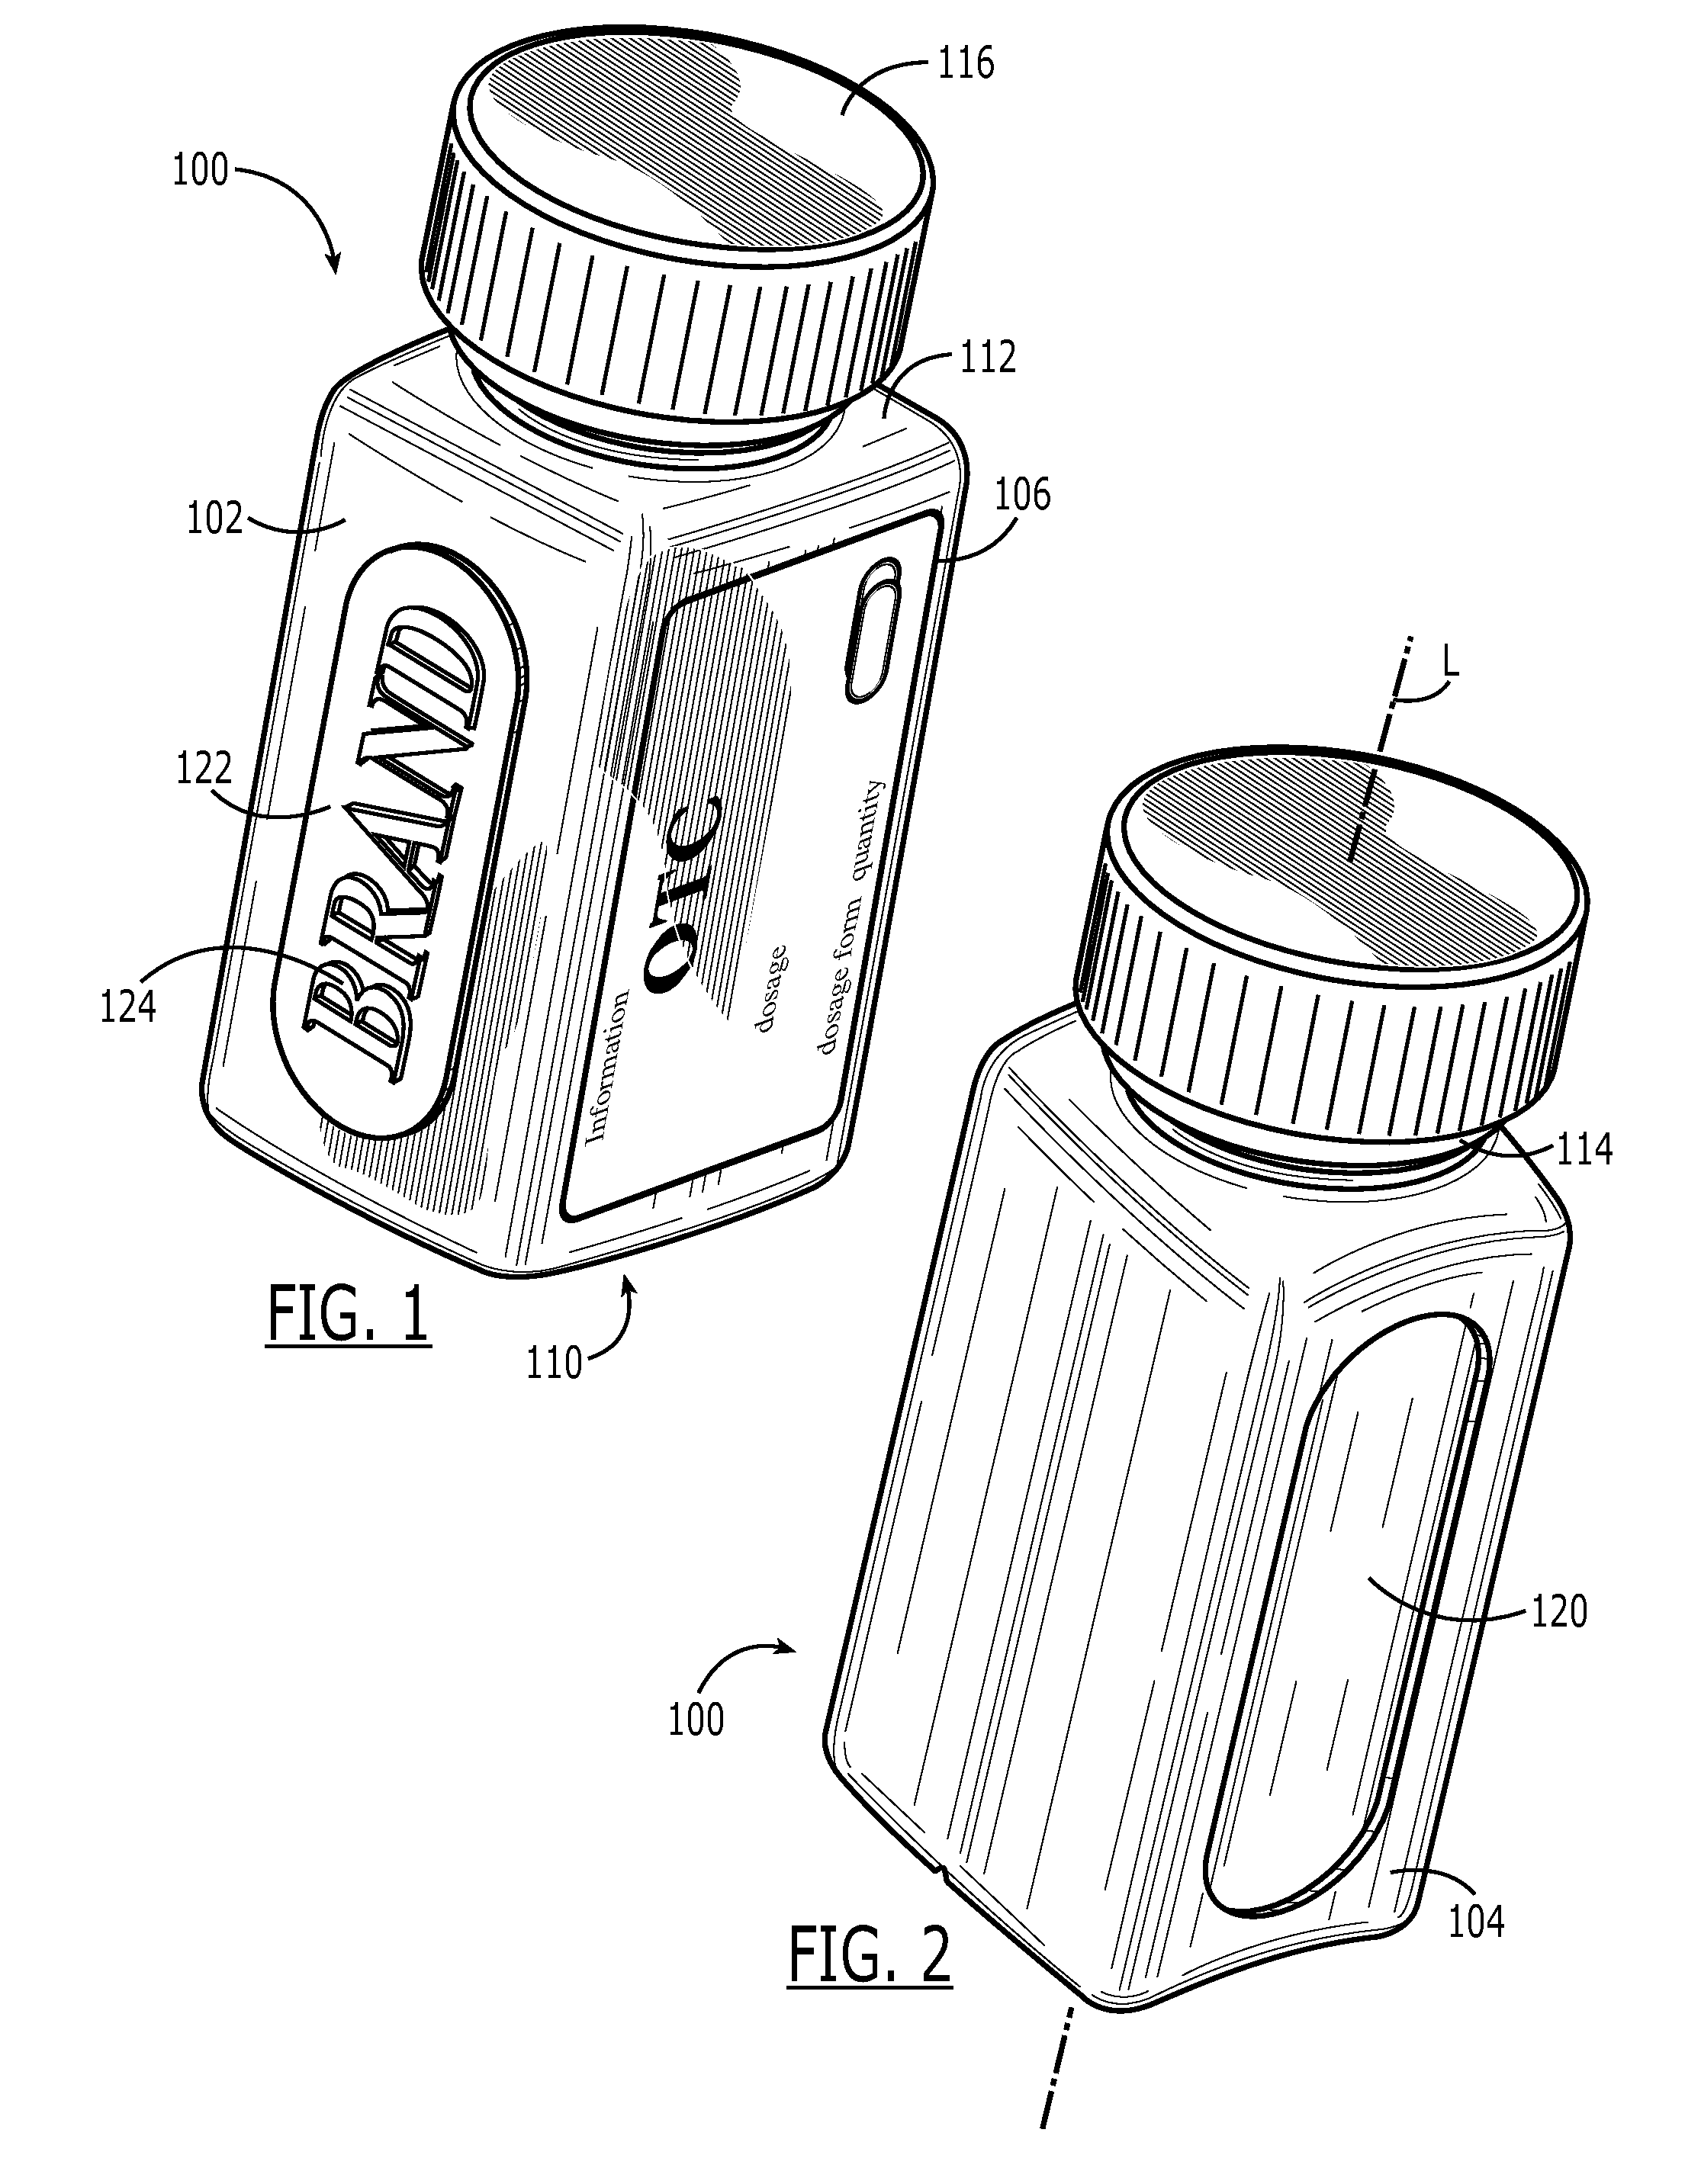 Primary Packaging and Display Therefor